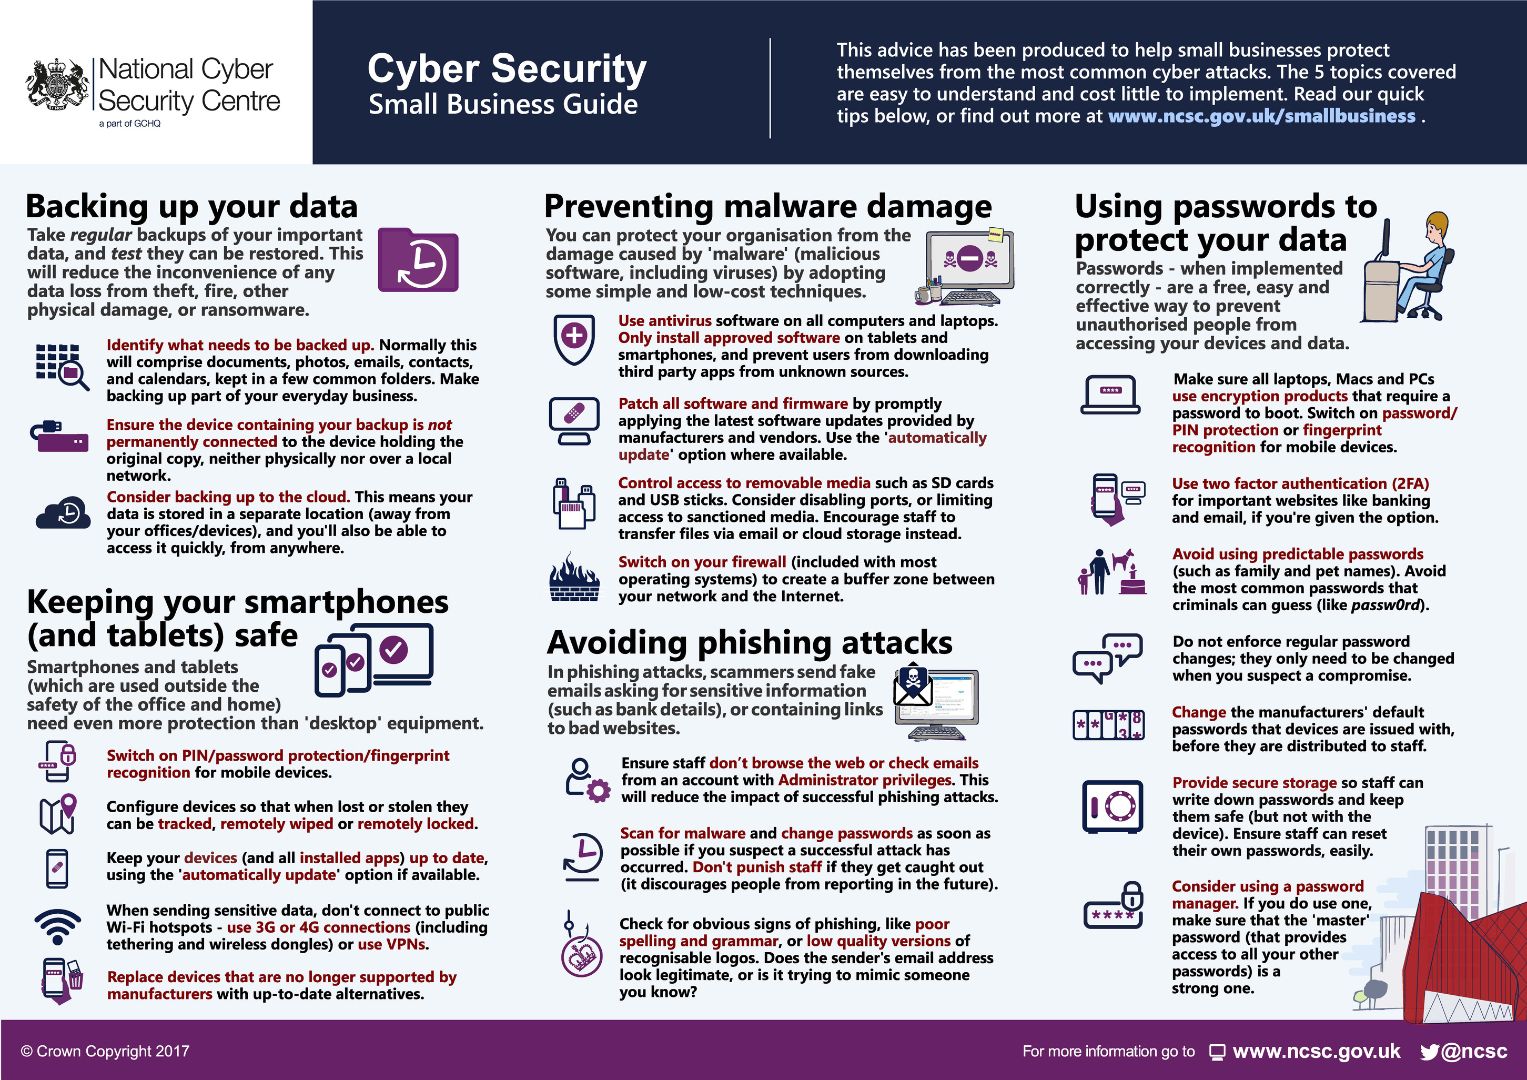 cyber security guide from the NCSC